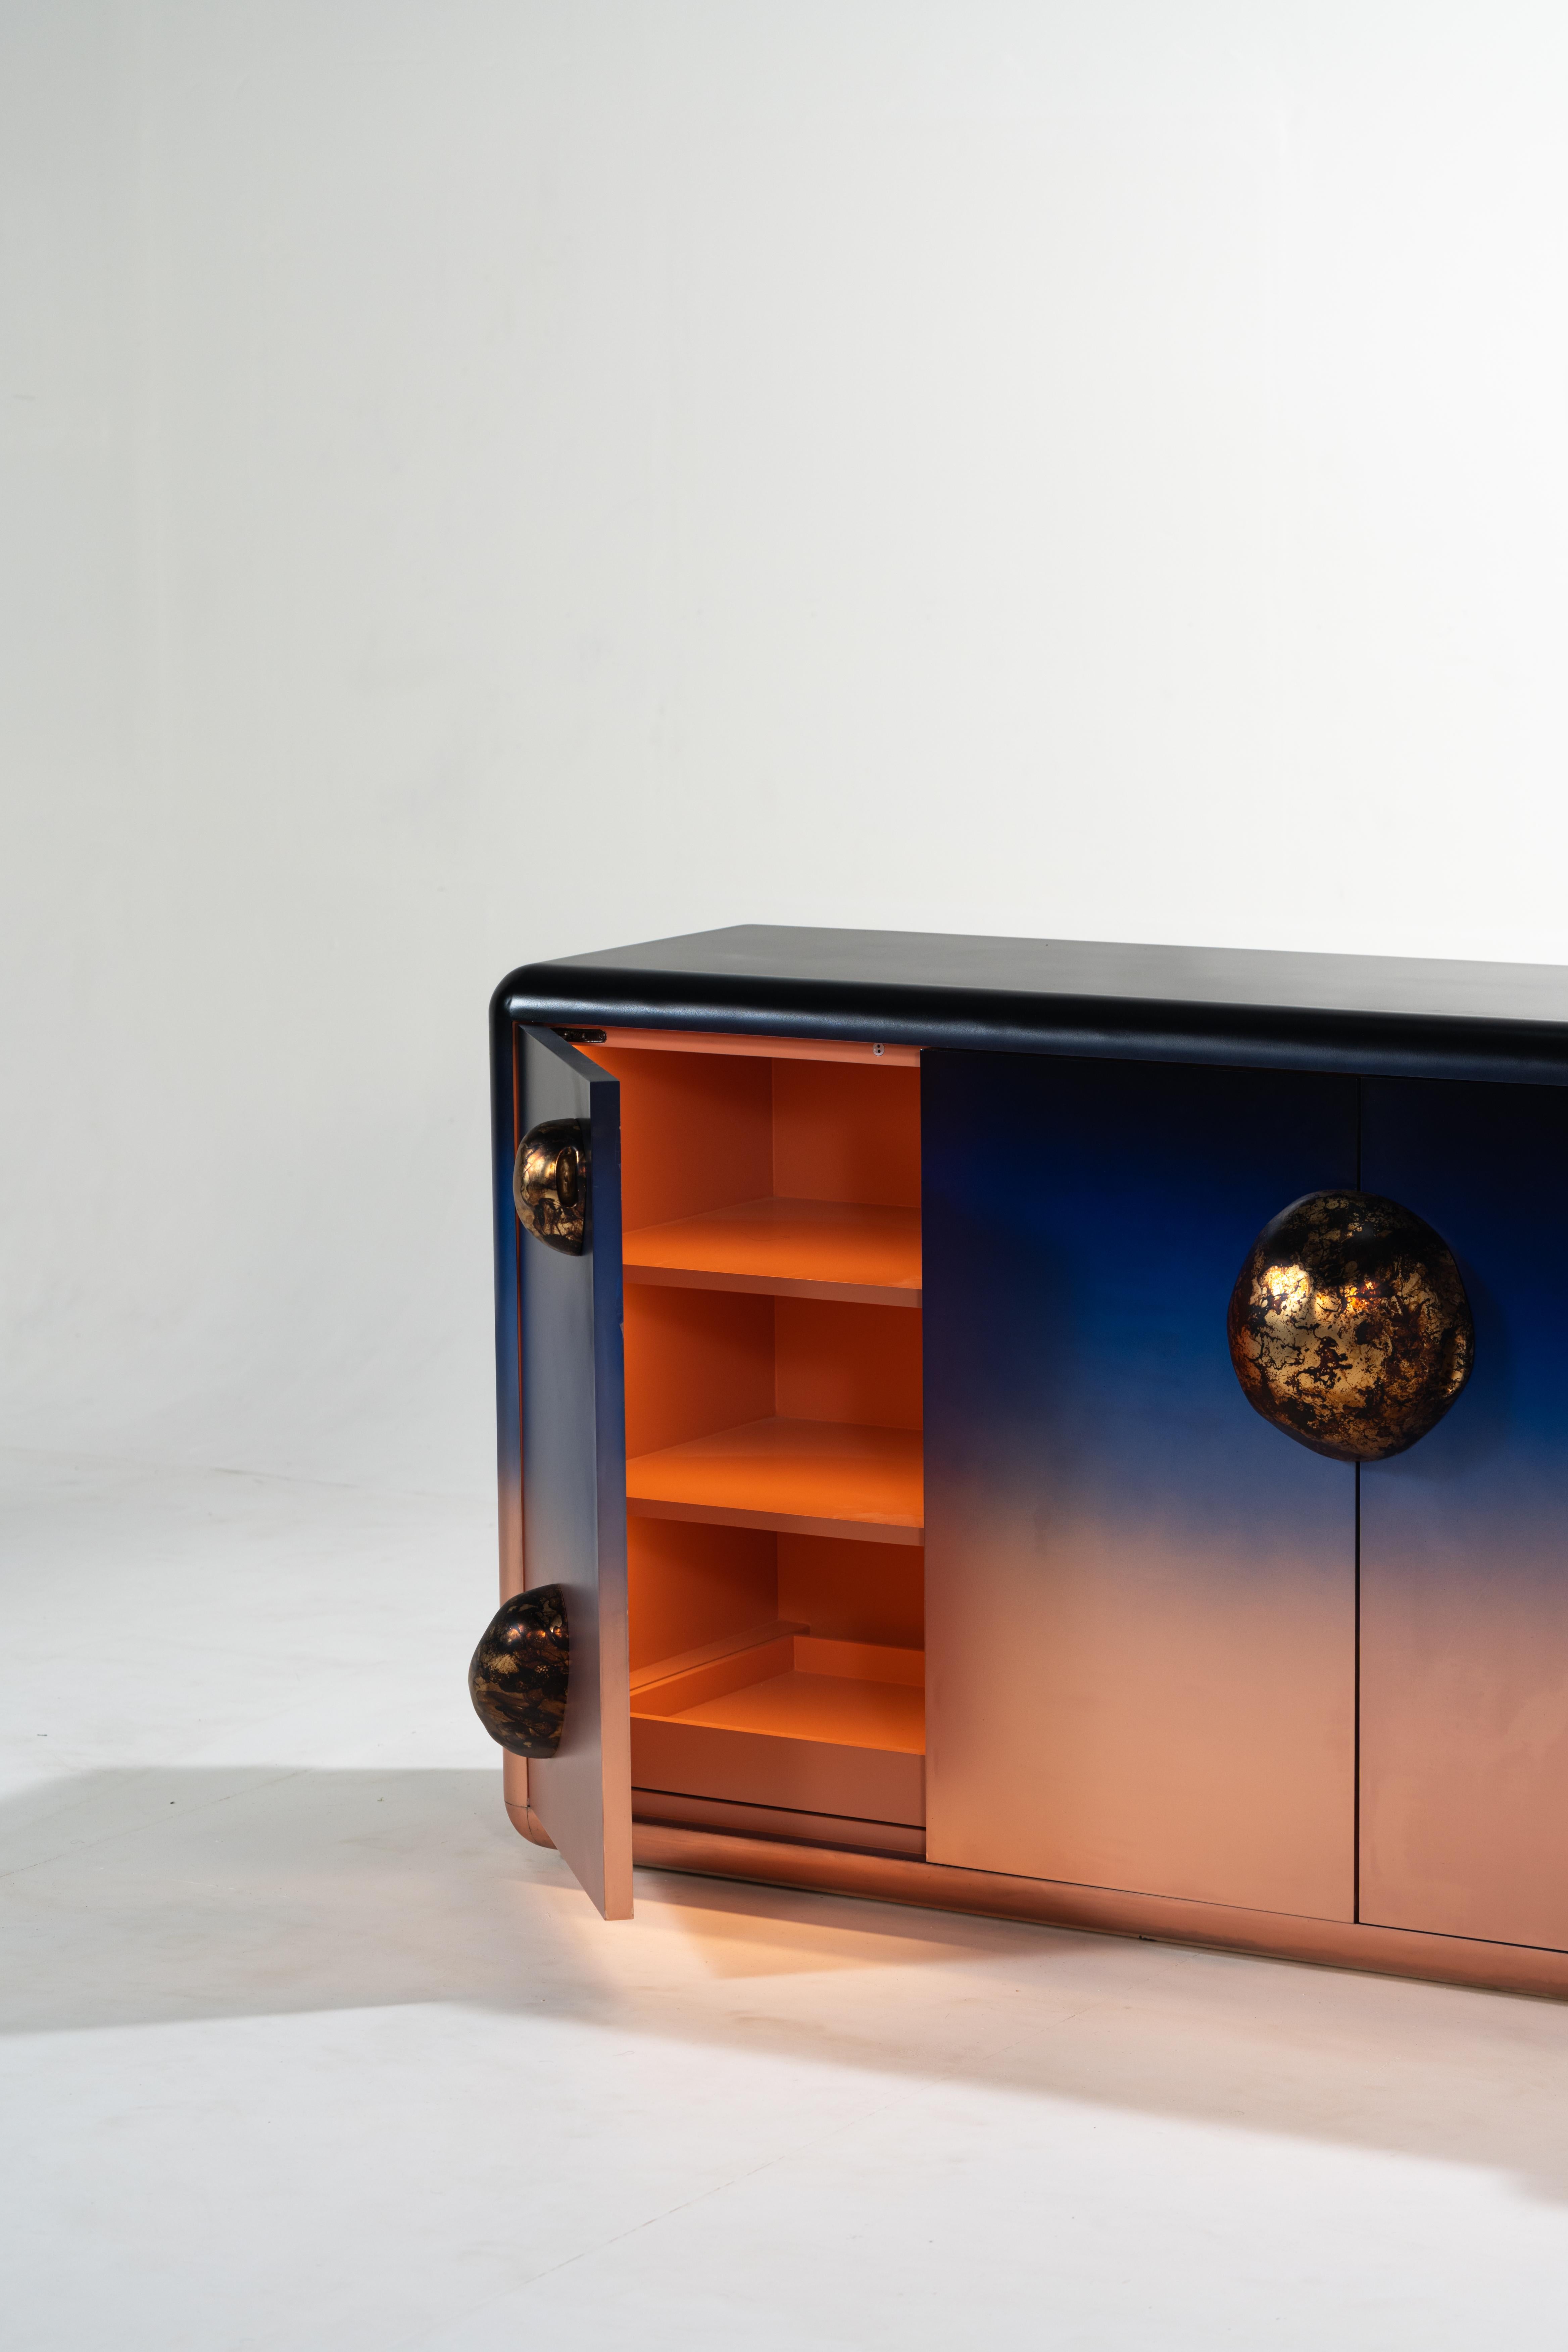 Celestial forms on the extravagant Celestial Console against coppery blue skies. A fabulous cabinet for your home which appears to be a sculptural piece but is a functional piece of furniture. 
An ethereal cabinet covered in copper with the gradient